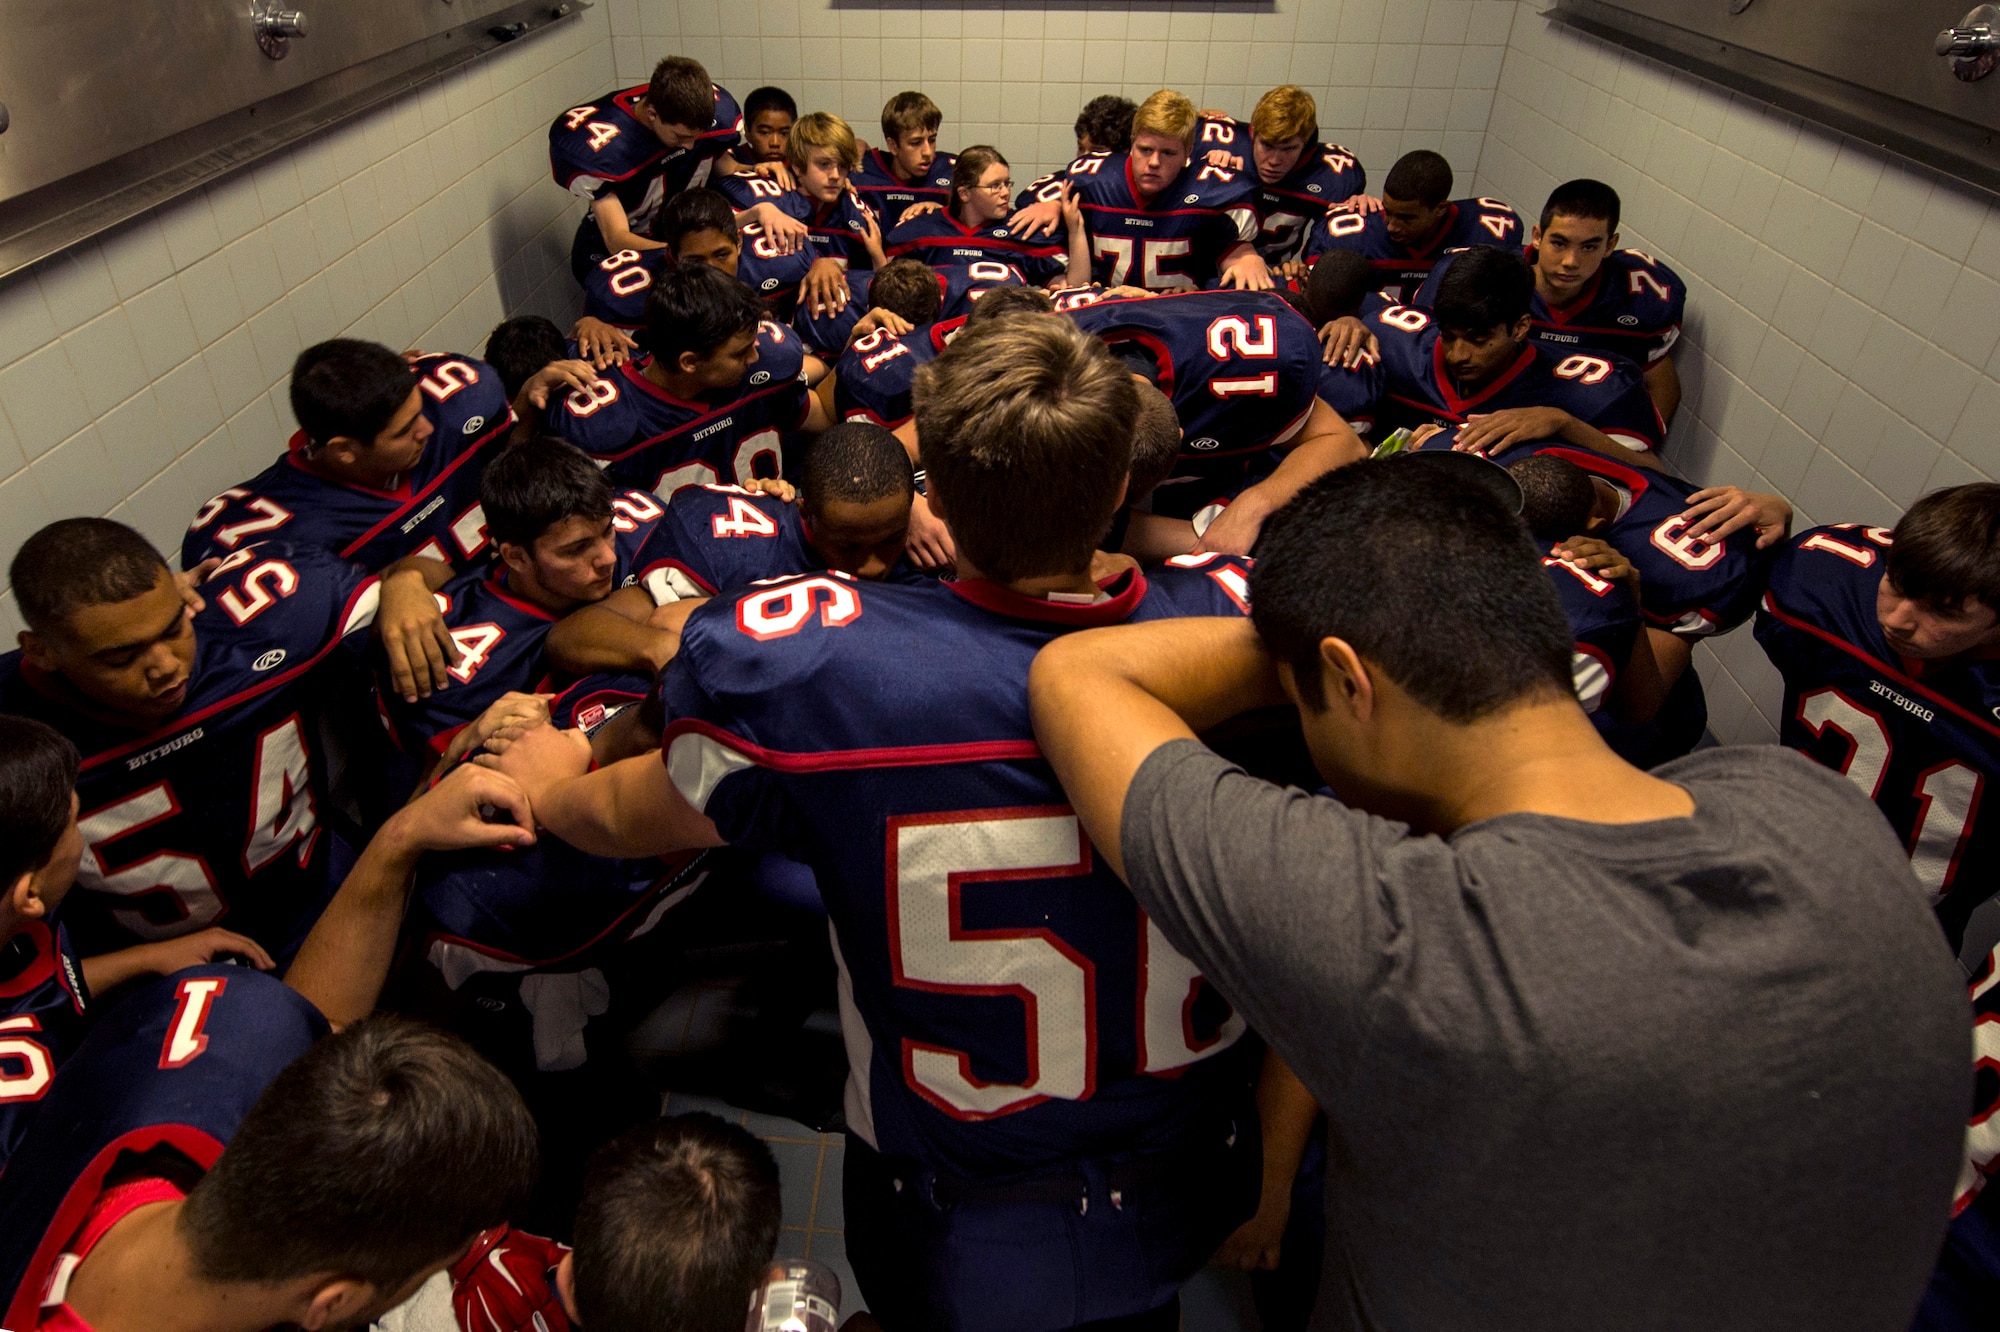 Bitburg Barons football players pray prior to the start of their season opener game against the Baumholder Buccaneers Sept. 6, 2014, at Bitburg Annex, Germany. The team comprises more than 30 players. (U.S. Air Force photo by Senior Airman Rusty Frank/Released)